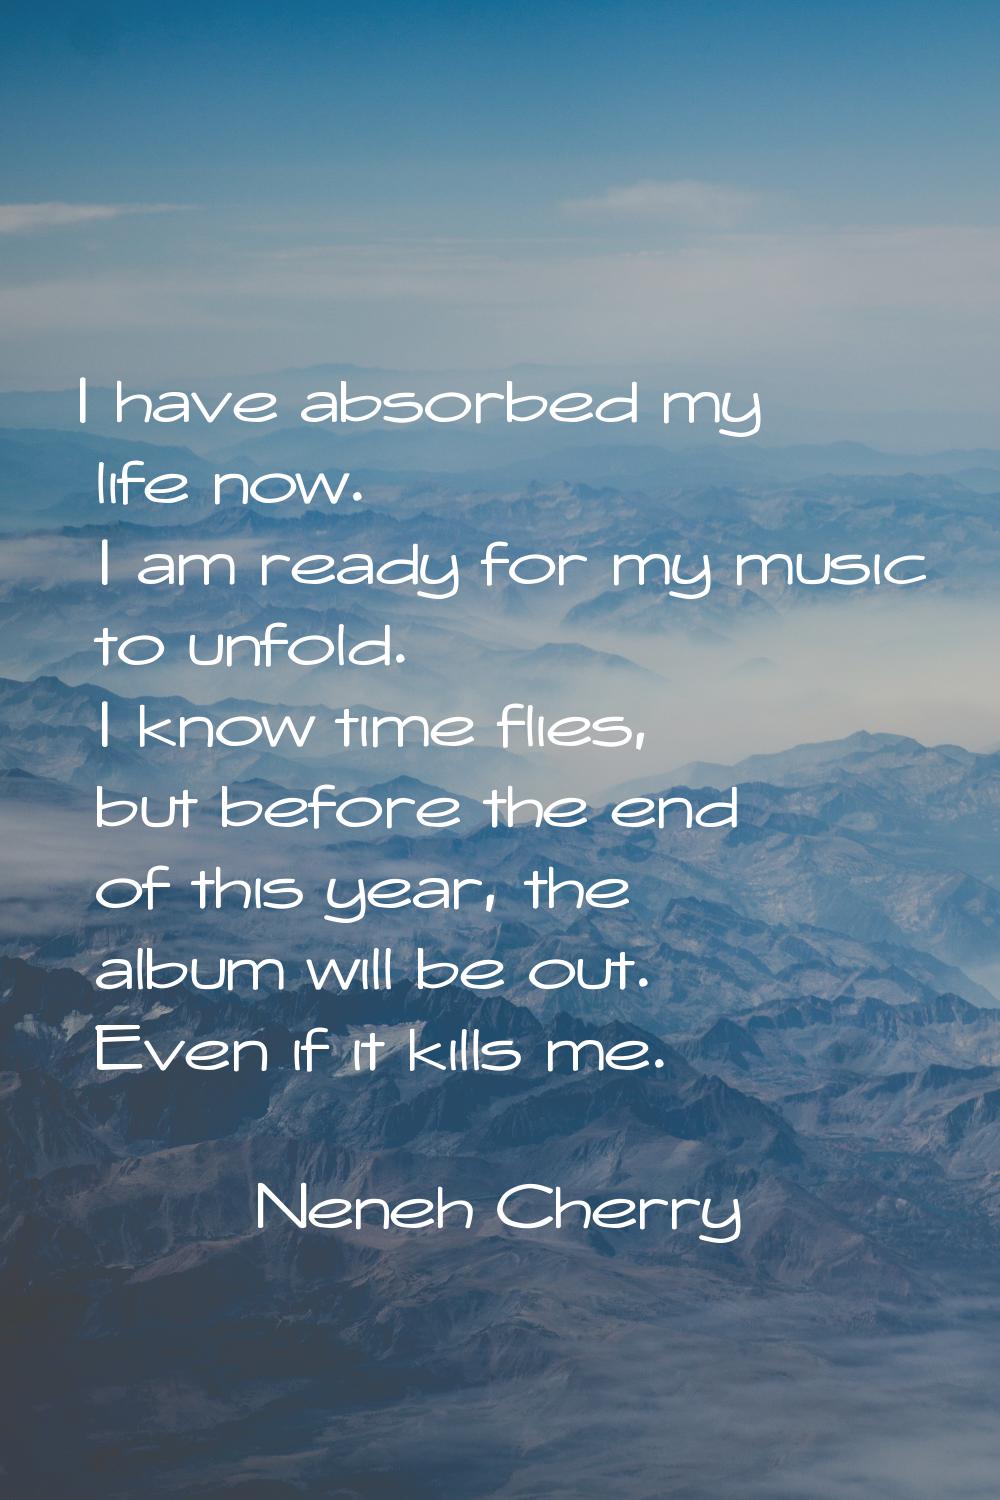 I have absorbed my life now. I am ready for my music to unfold. I know time flies, but before the e